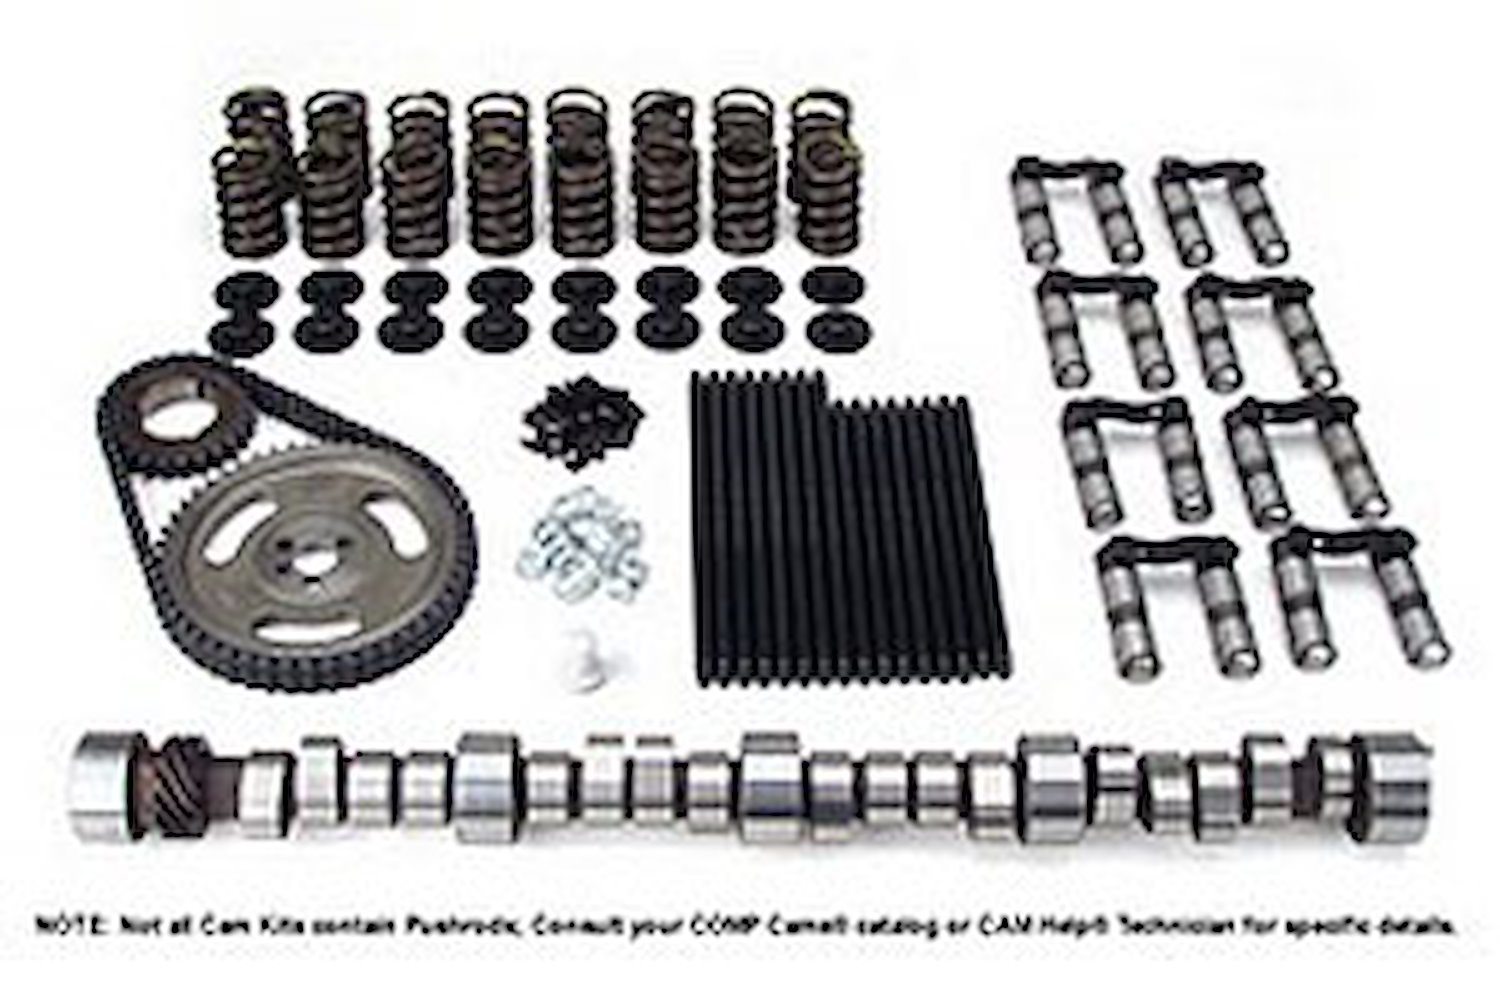 Xtreme Energy Mechanical Roller Camshaft Complete Kit Big Block Chevy 1965-96 Lift: .646"/.653"